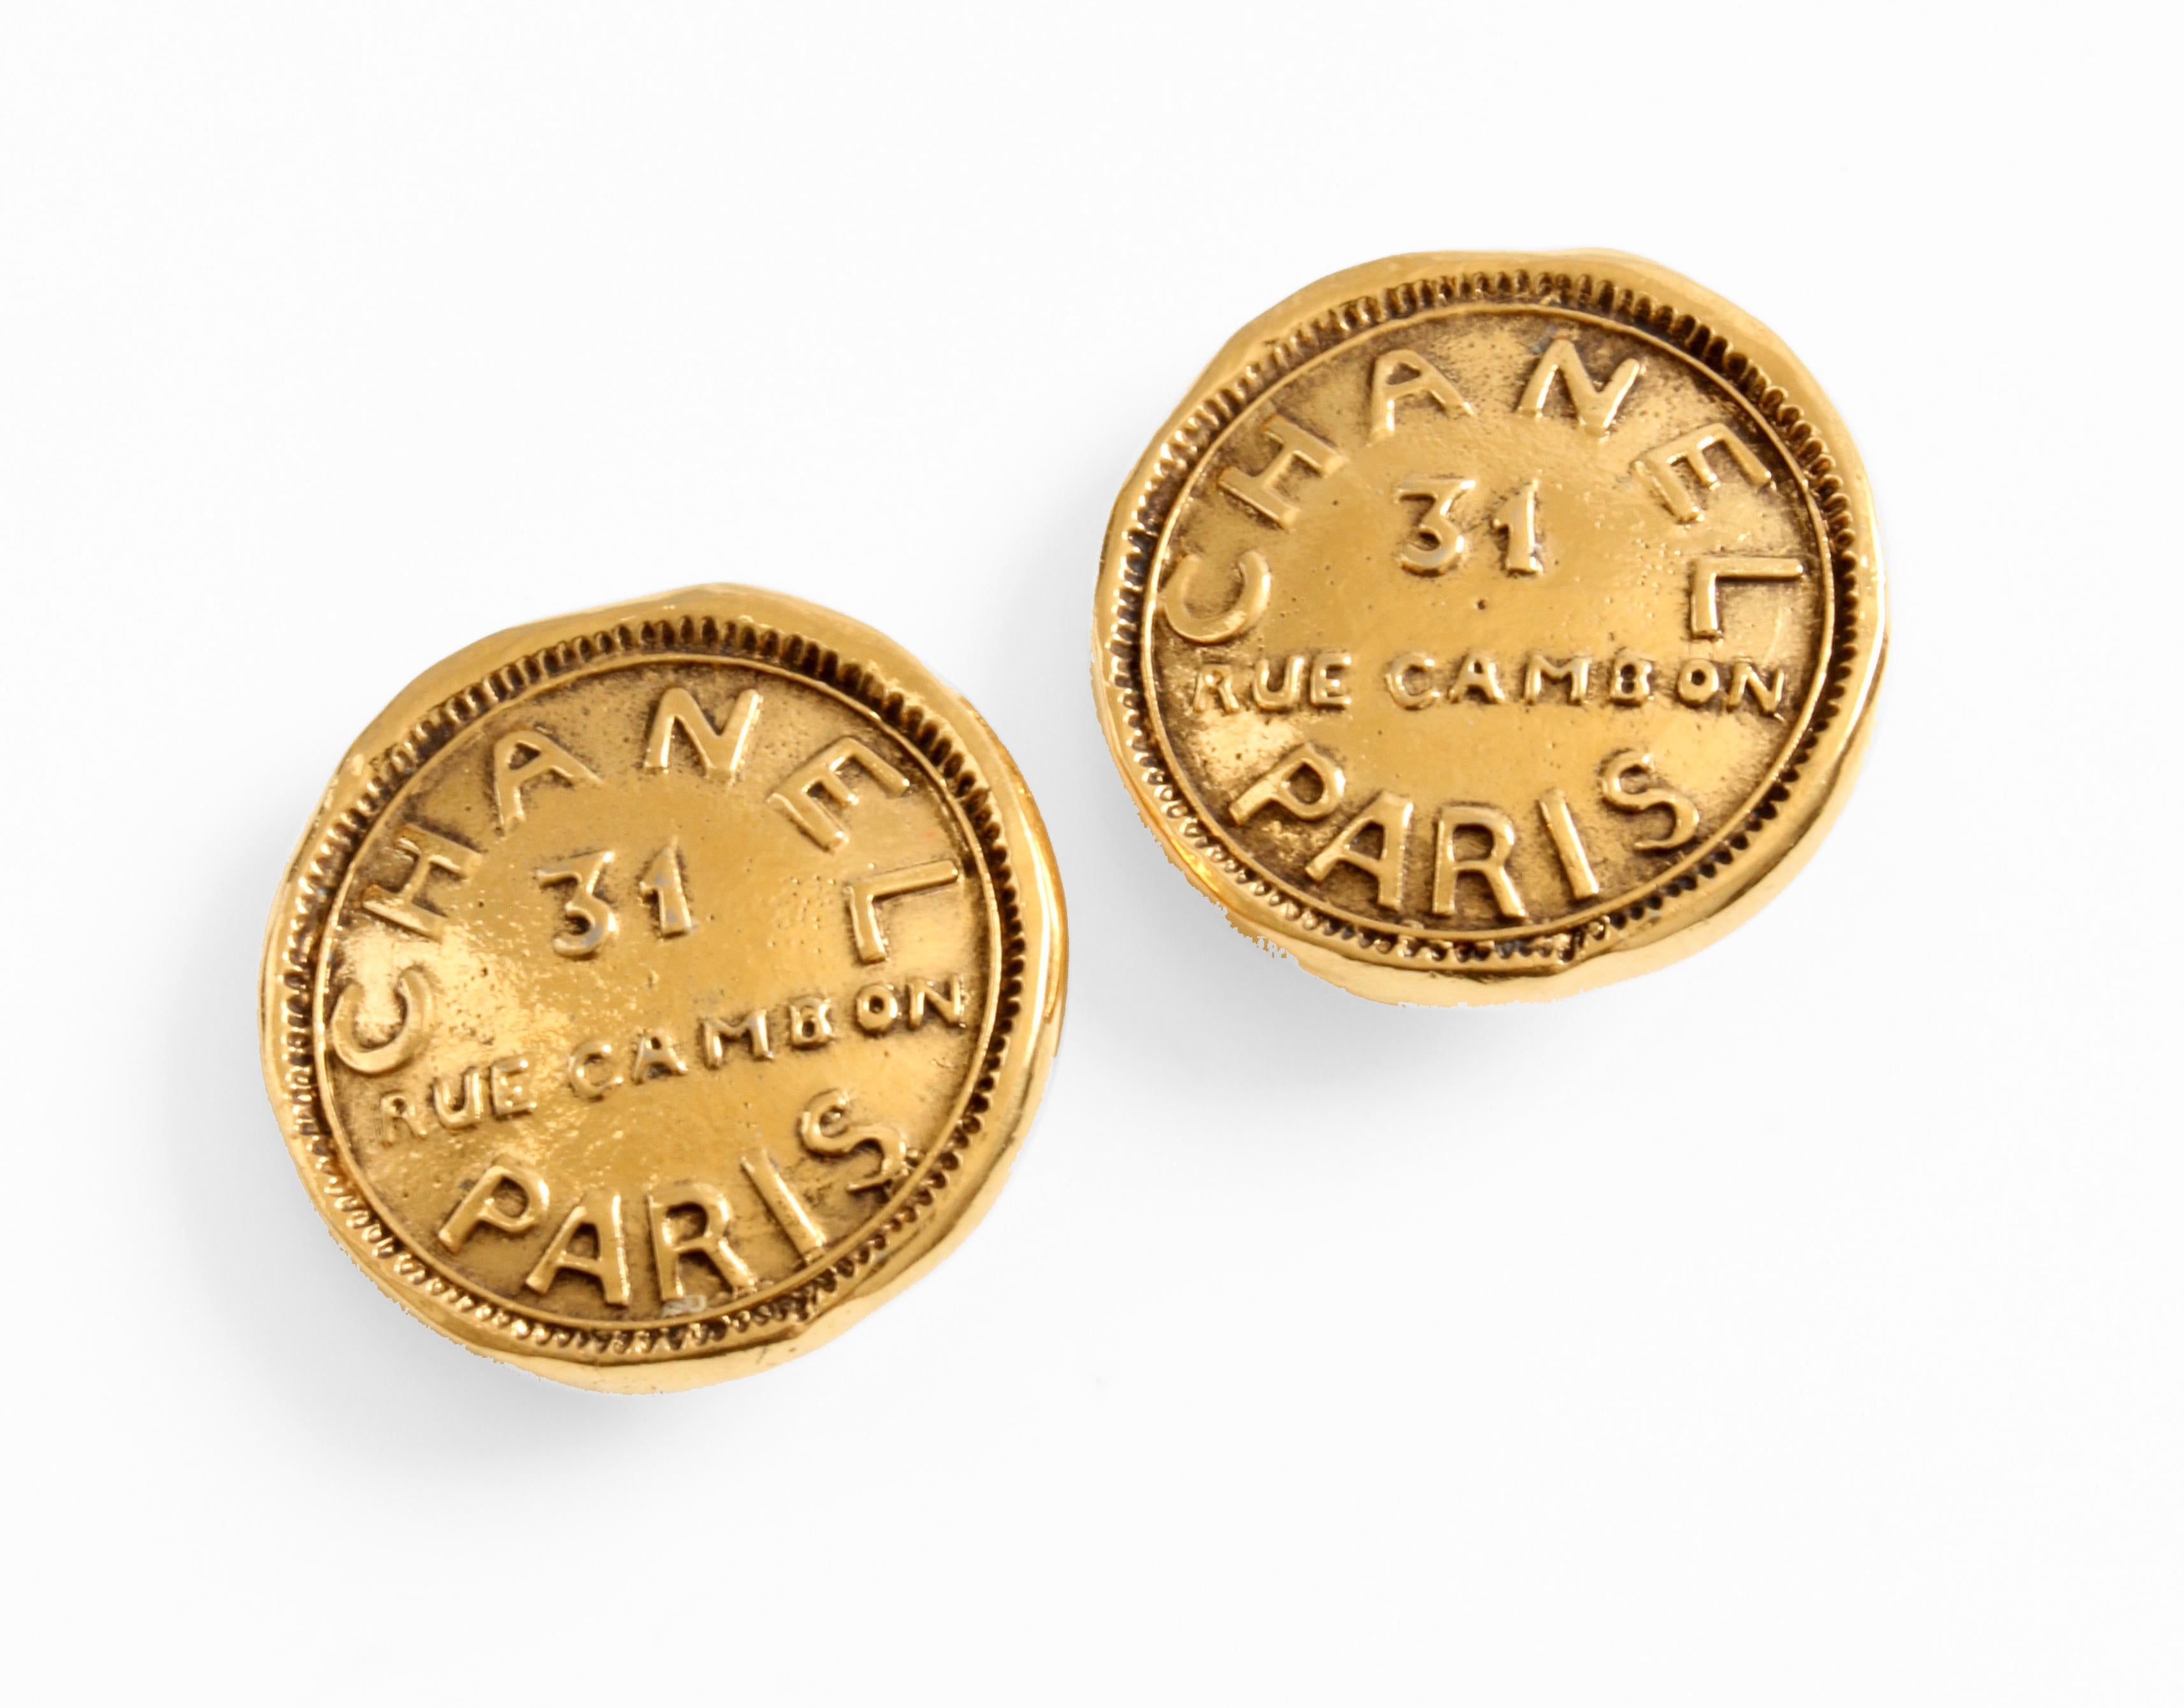 These chic clip-style earrings were made by Chanel, most likely in the early 1980s.  Made from gold metal, they features round button-style fronts with CHANEL 31 RUE CAMBON PARIS in bold graphic letters.  In good preowned condition given their age,